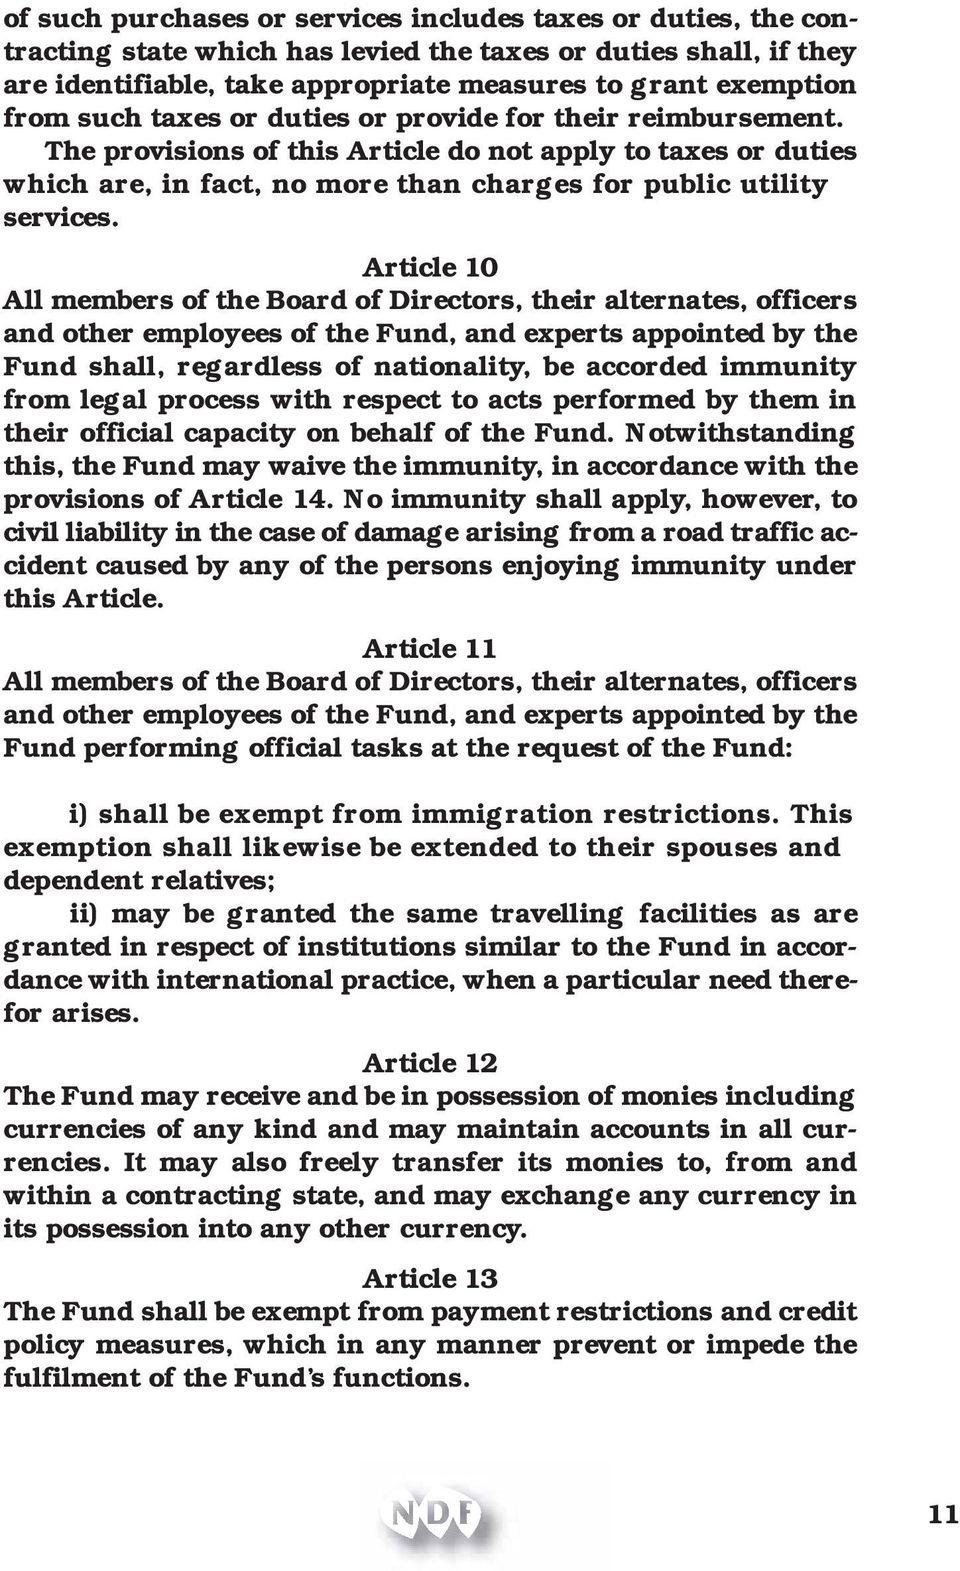 Article 10 All members of the Board of Directors, their alternates, officers and other employees of the Fund, and experts appointed by the Fund shall, regardless of nationality, be accorded immunity